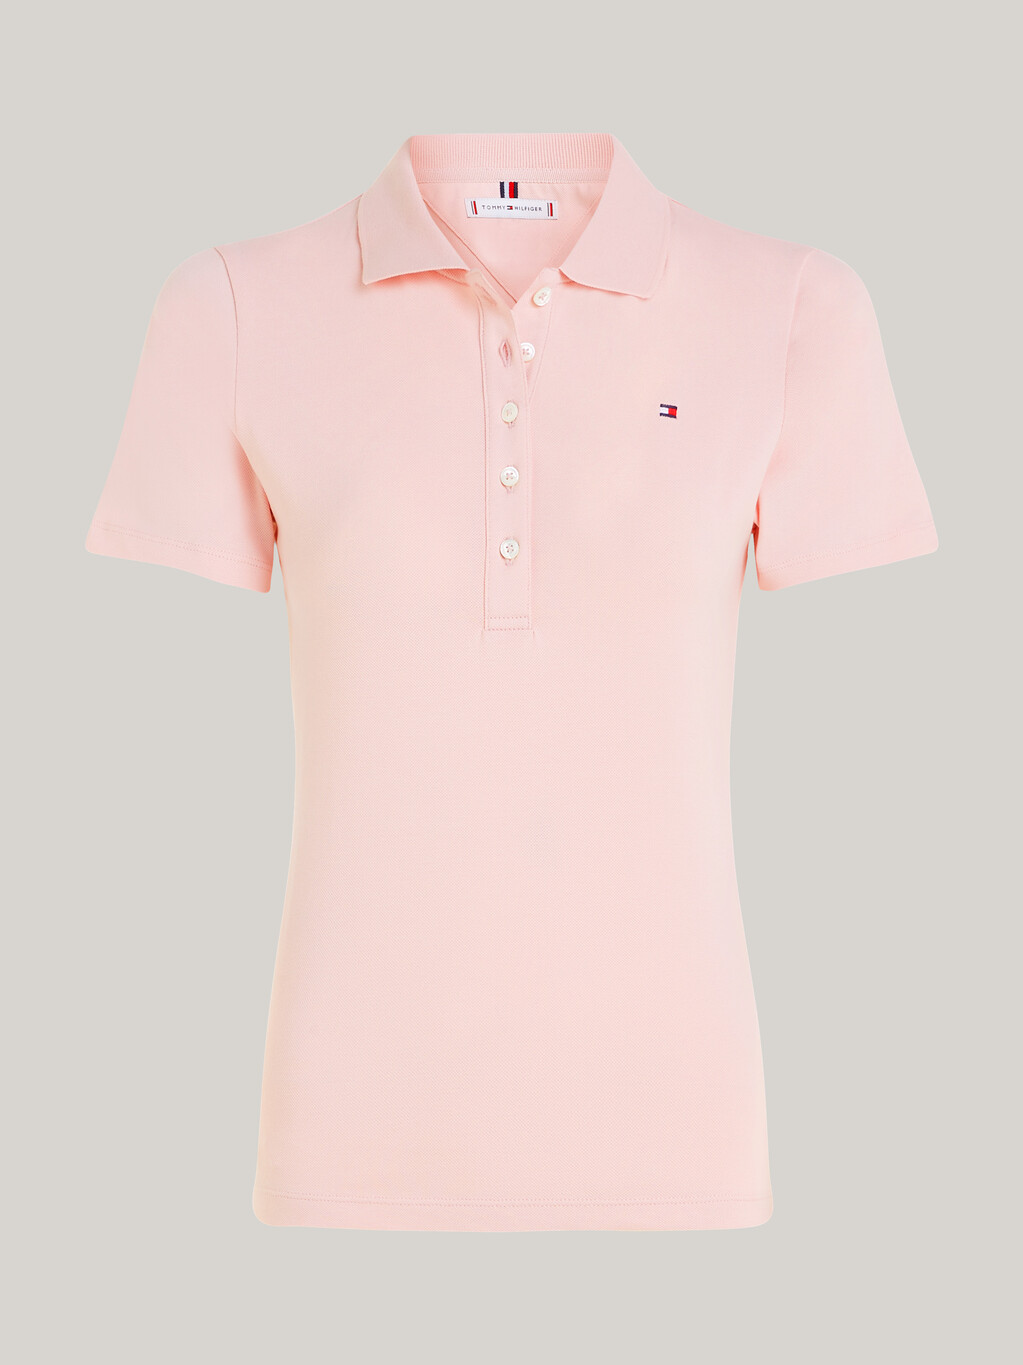 1985 Collection Slim Fit Polo Hilfiger Tommy | pink | Malaysia